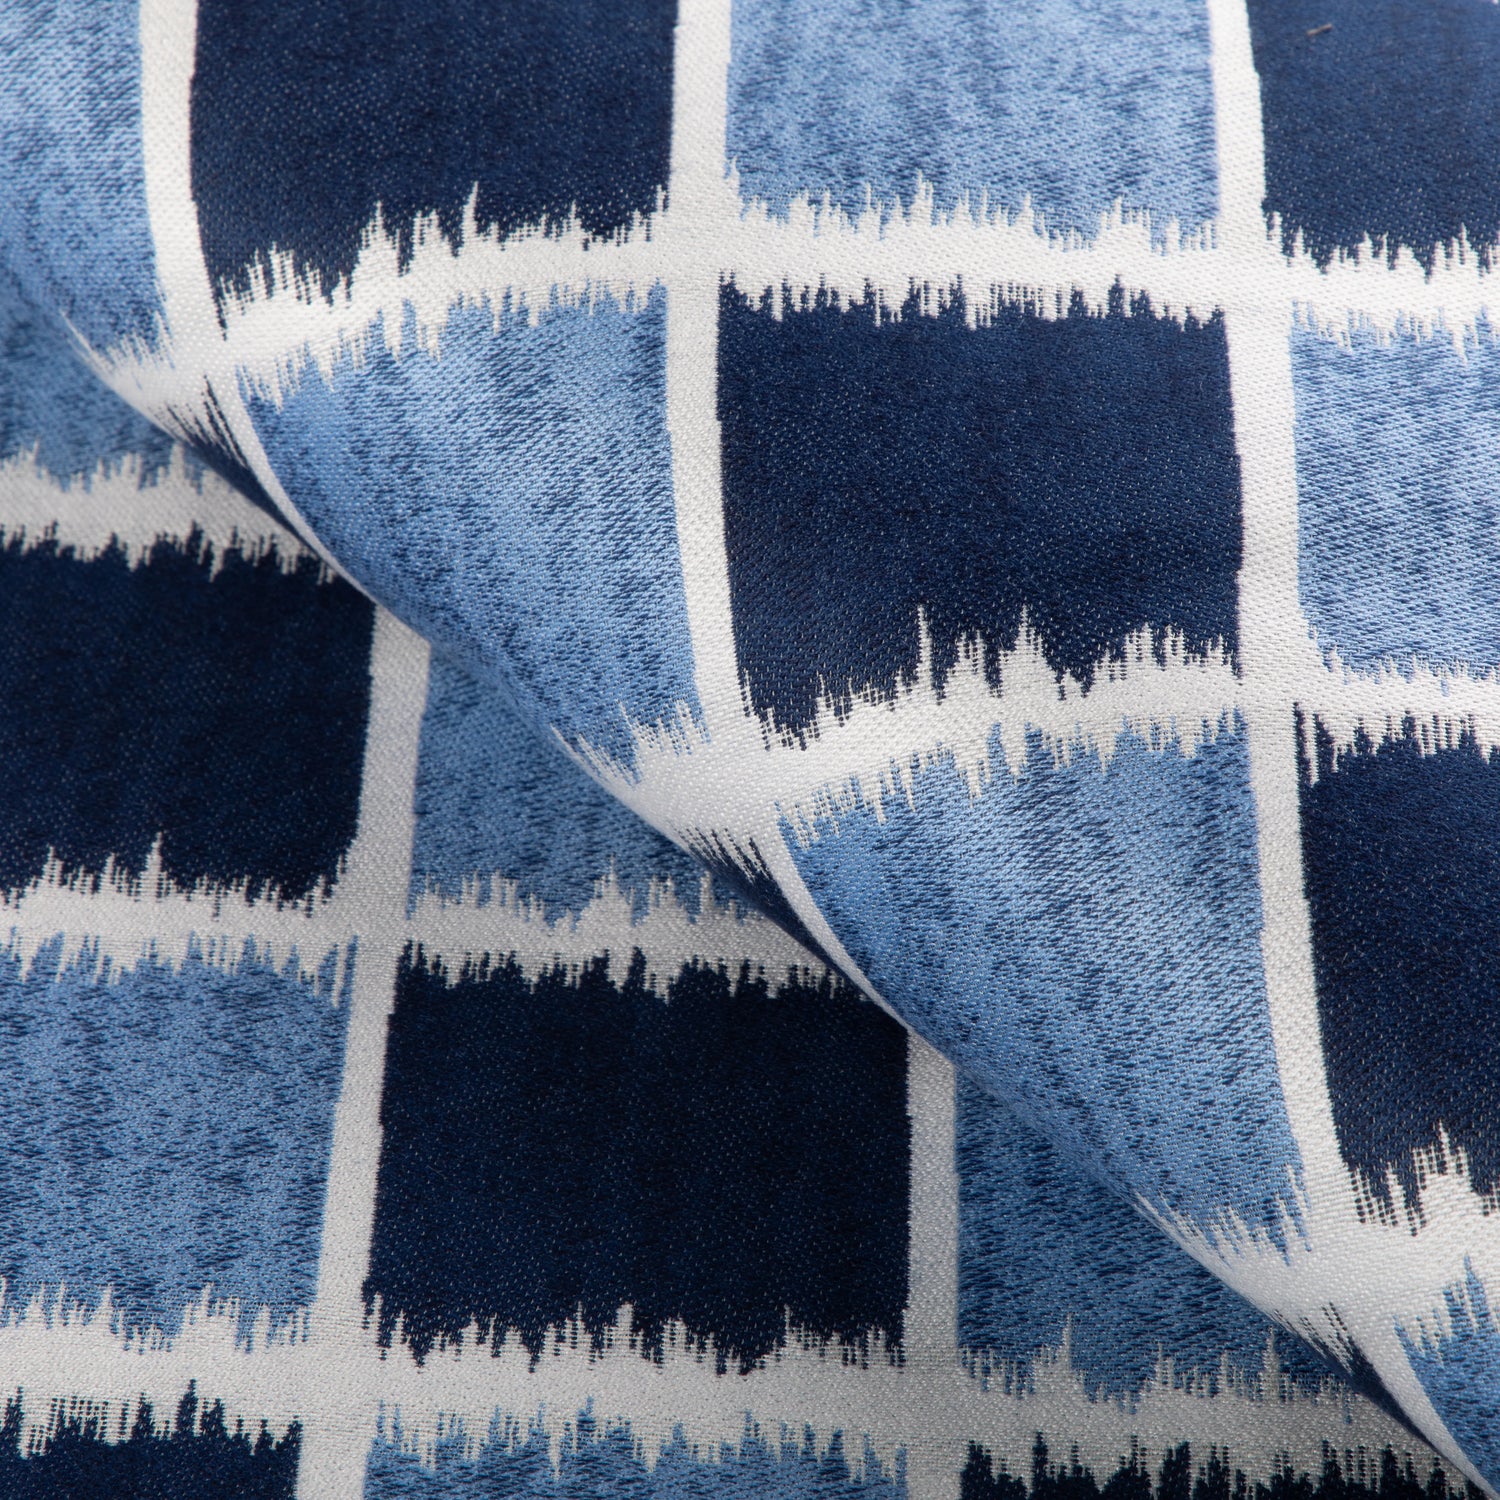 Fabric sample of Ikat Squares fabric in marine color - pattern 36936.5.0 - by Kravet Couture in the Riviera collection